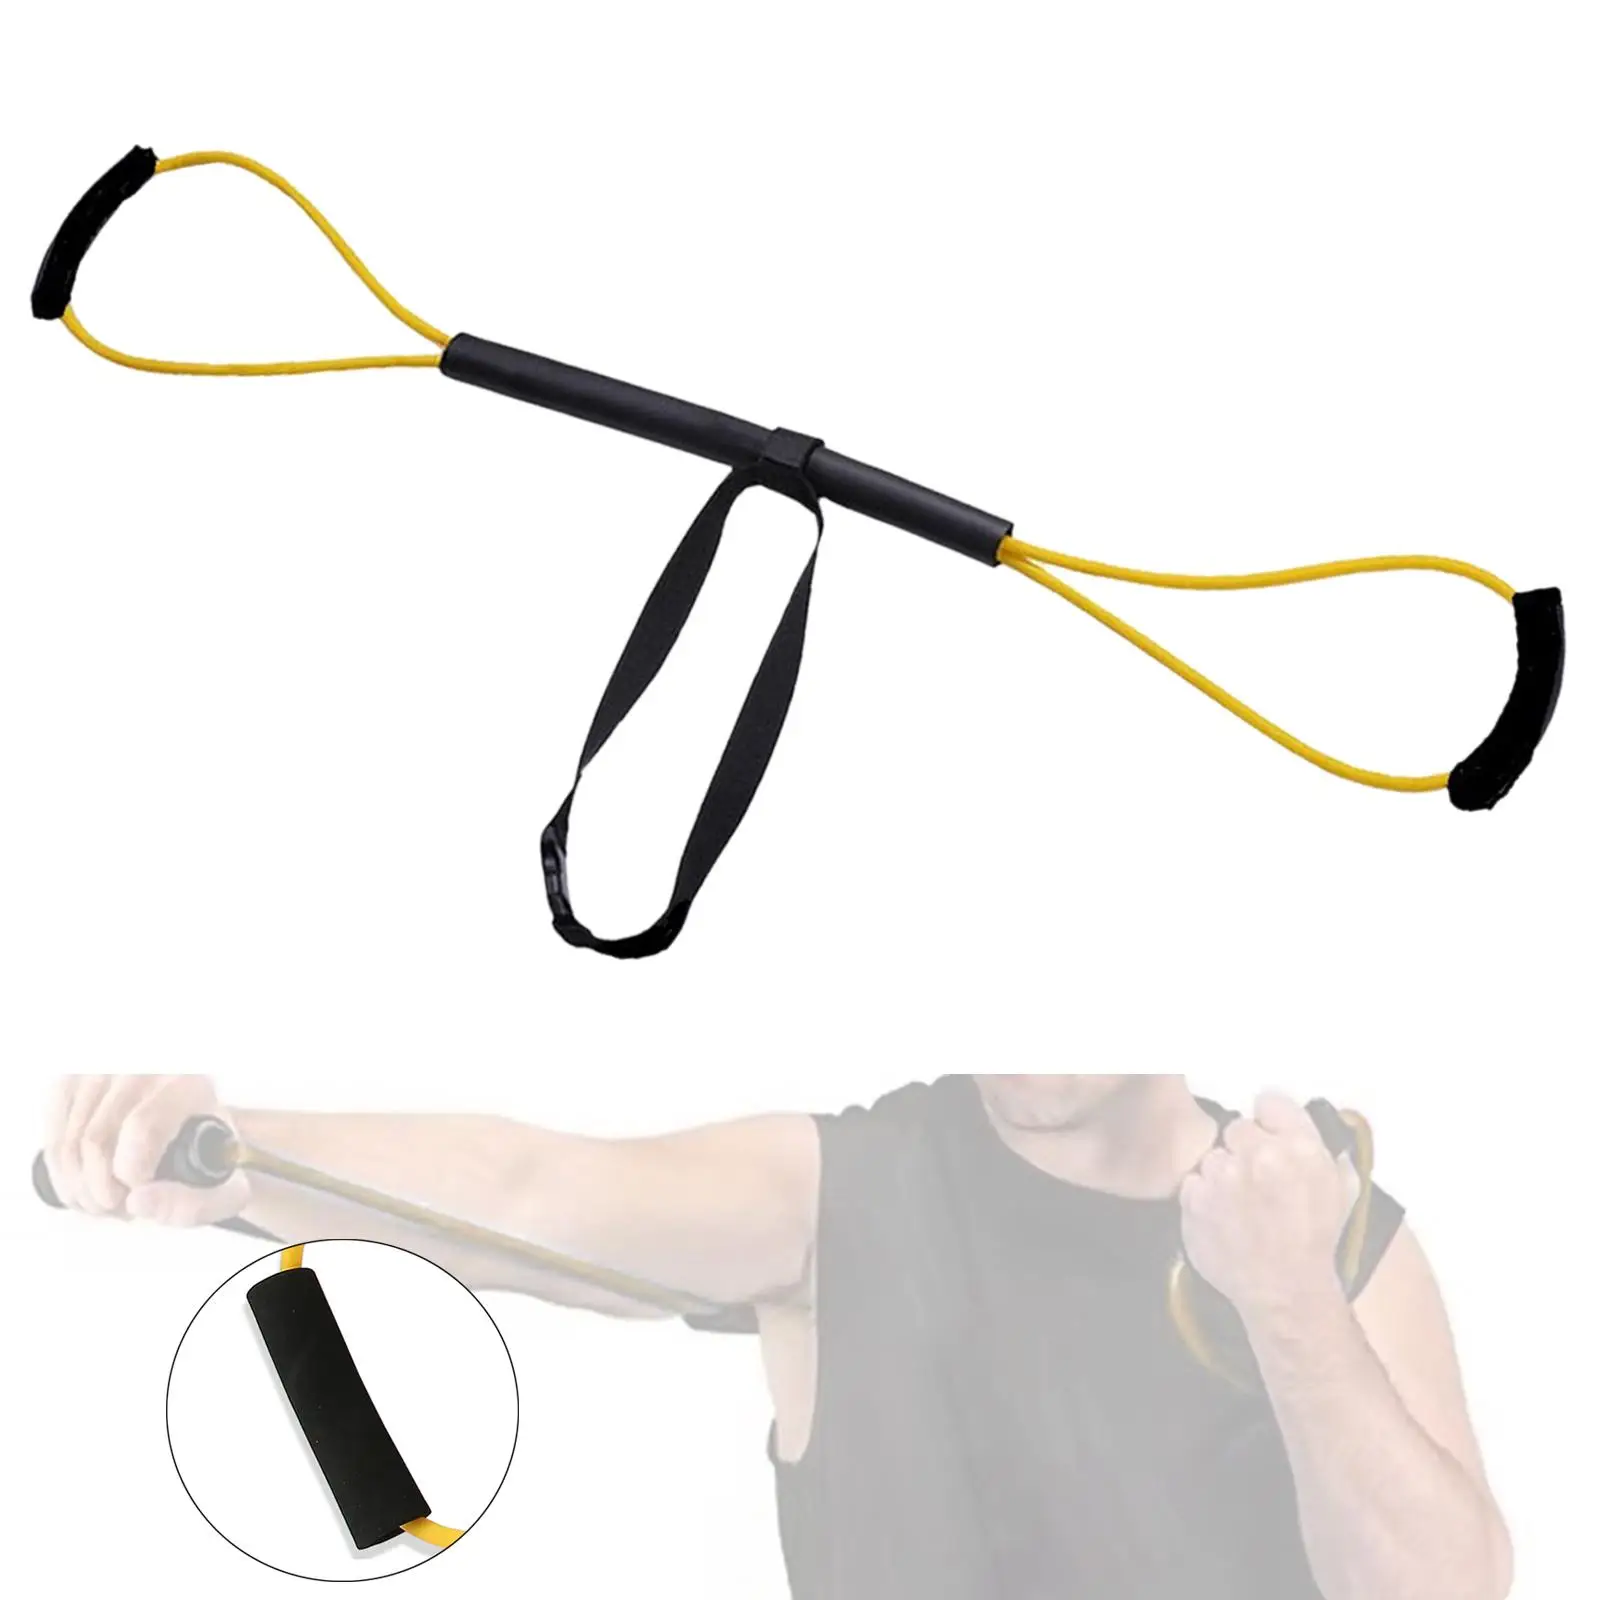 Boxing Resistance Bands Exercise Bands 15lbs Boxing Trainer Portable Elastic Bands Boxing Equipment for Boxing Training